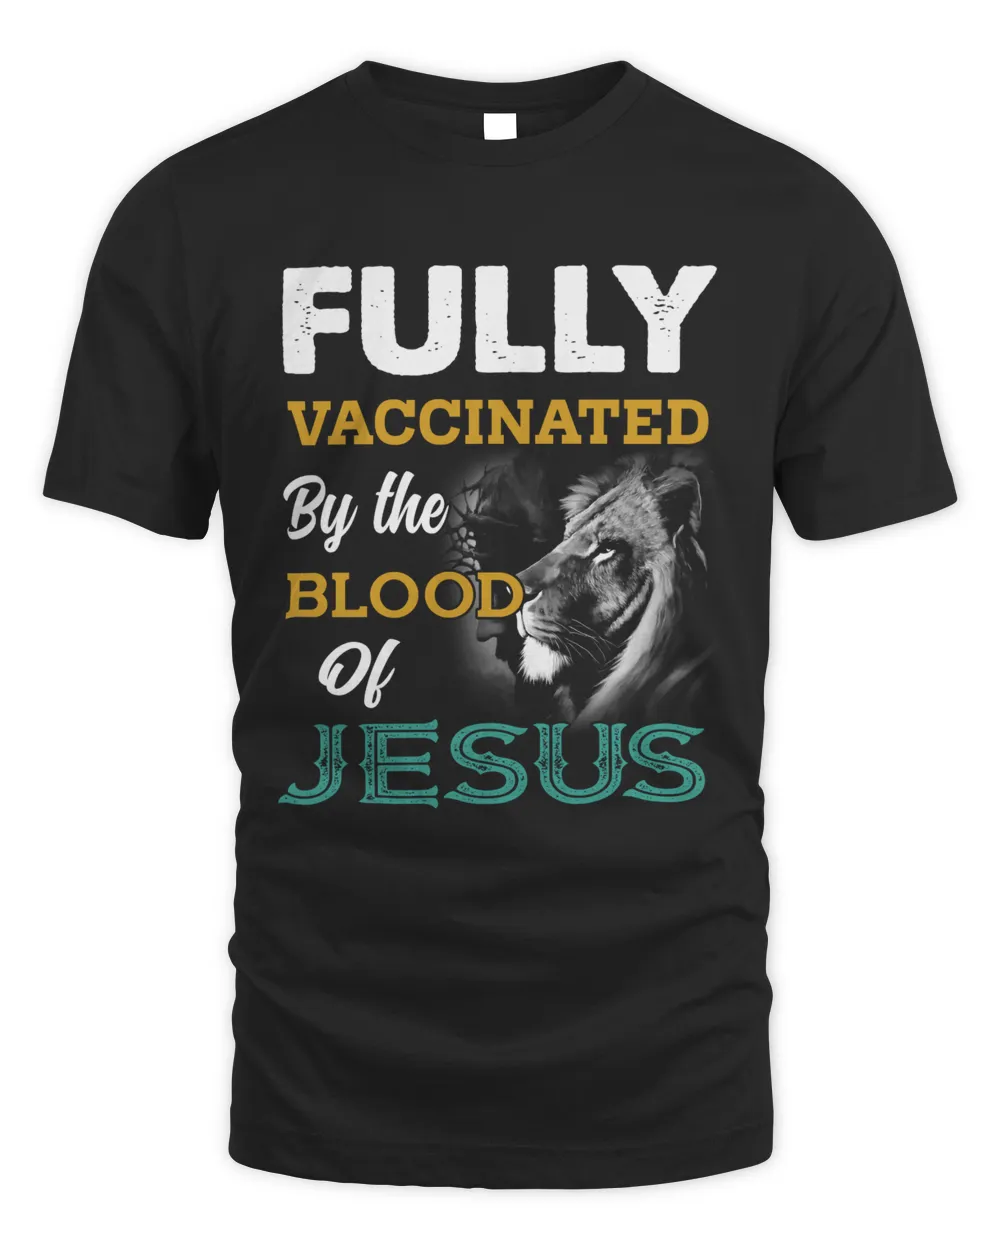 Fully vaccinated by the blood of Jesus